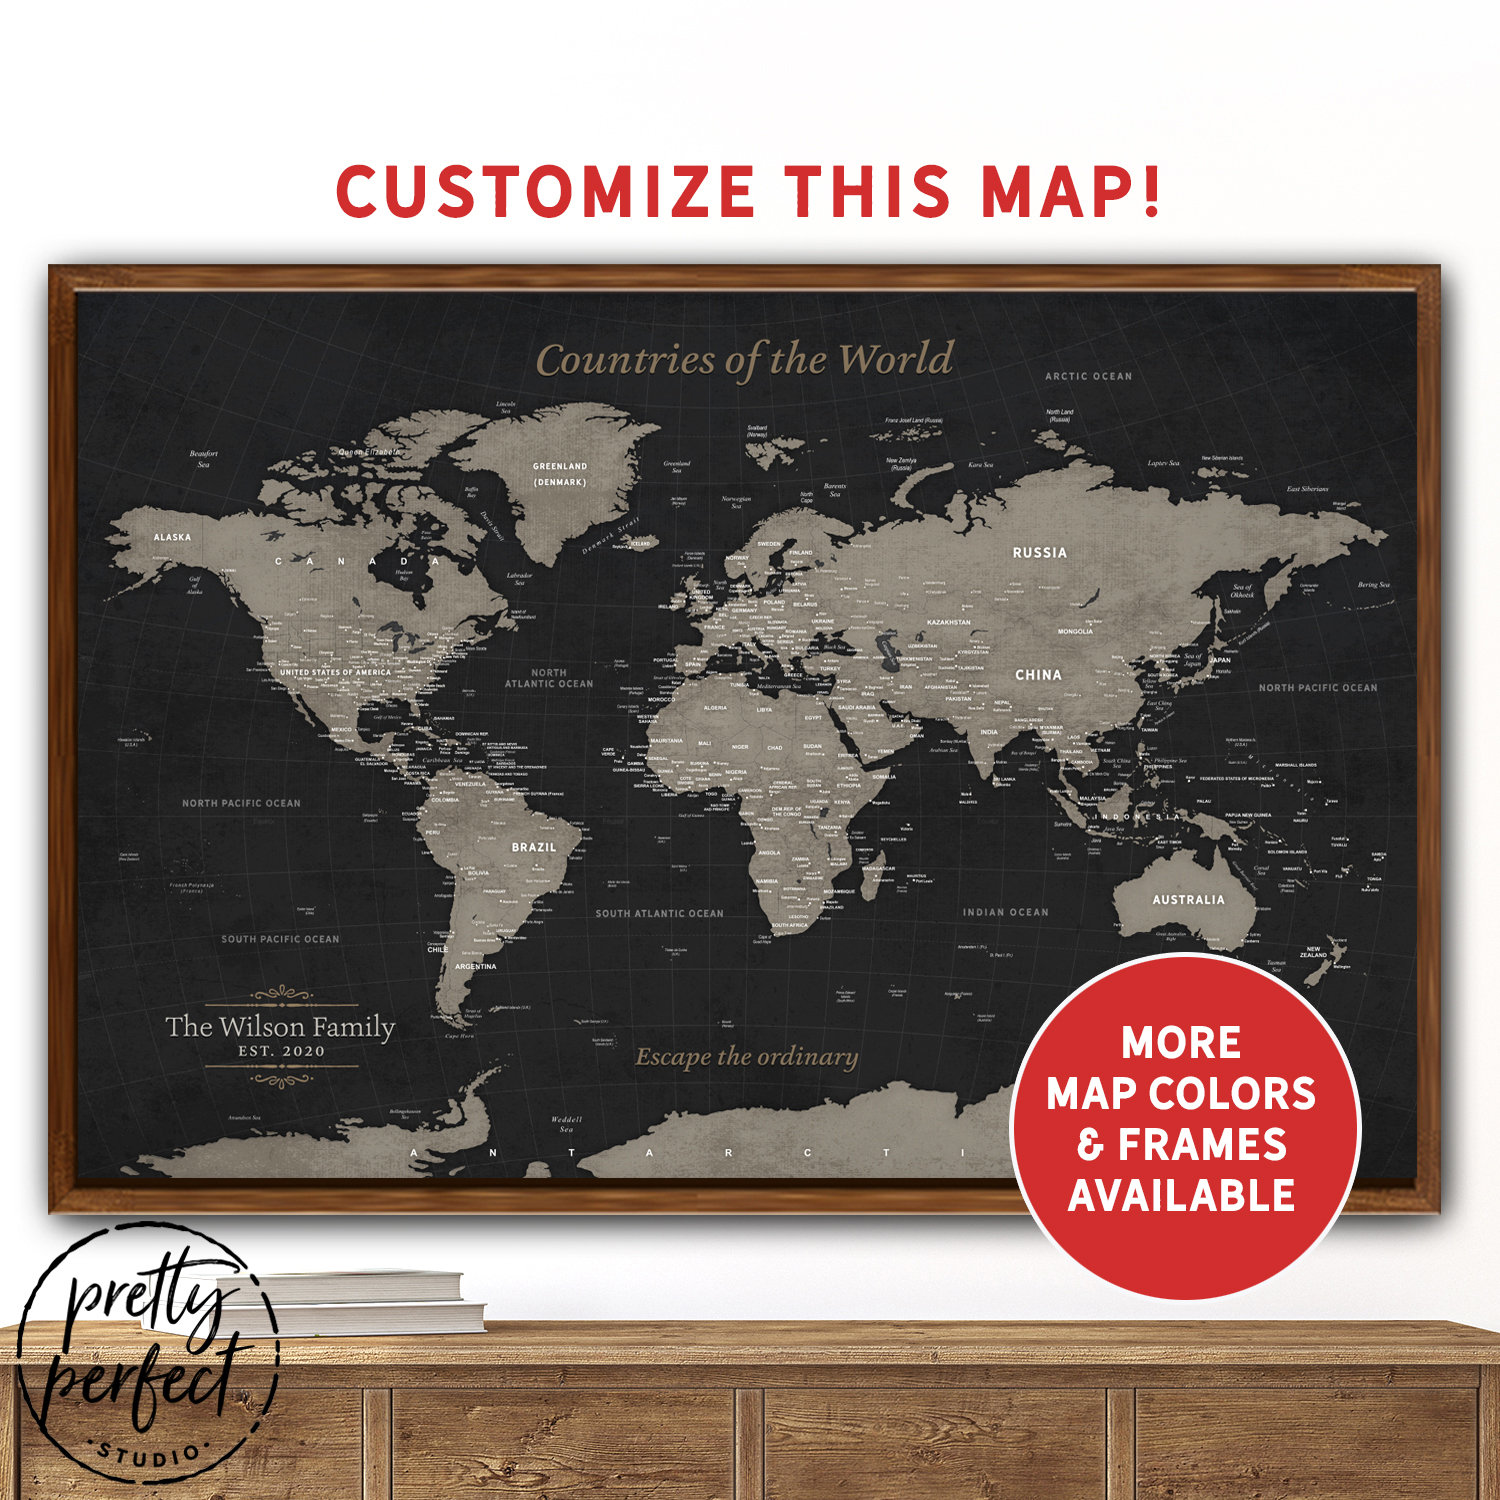 Large Size Scratch Off World Map Poster Personalized Travel